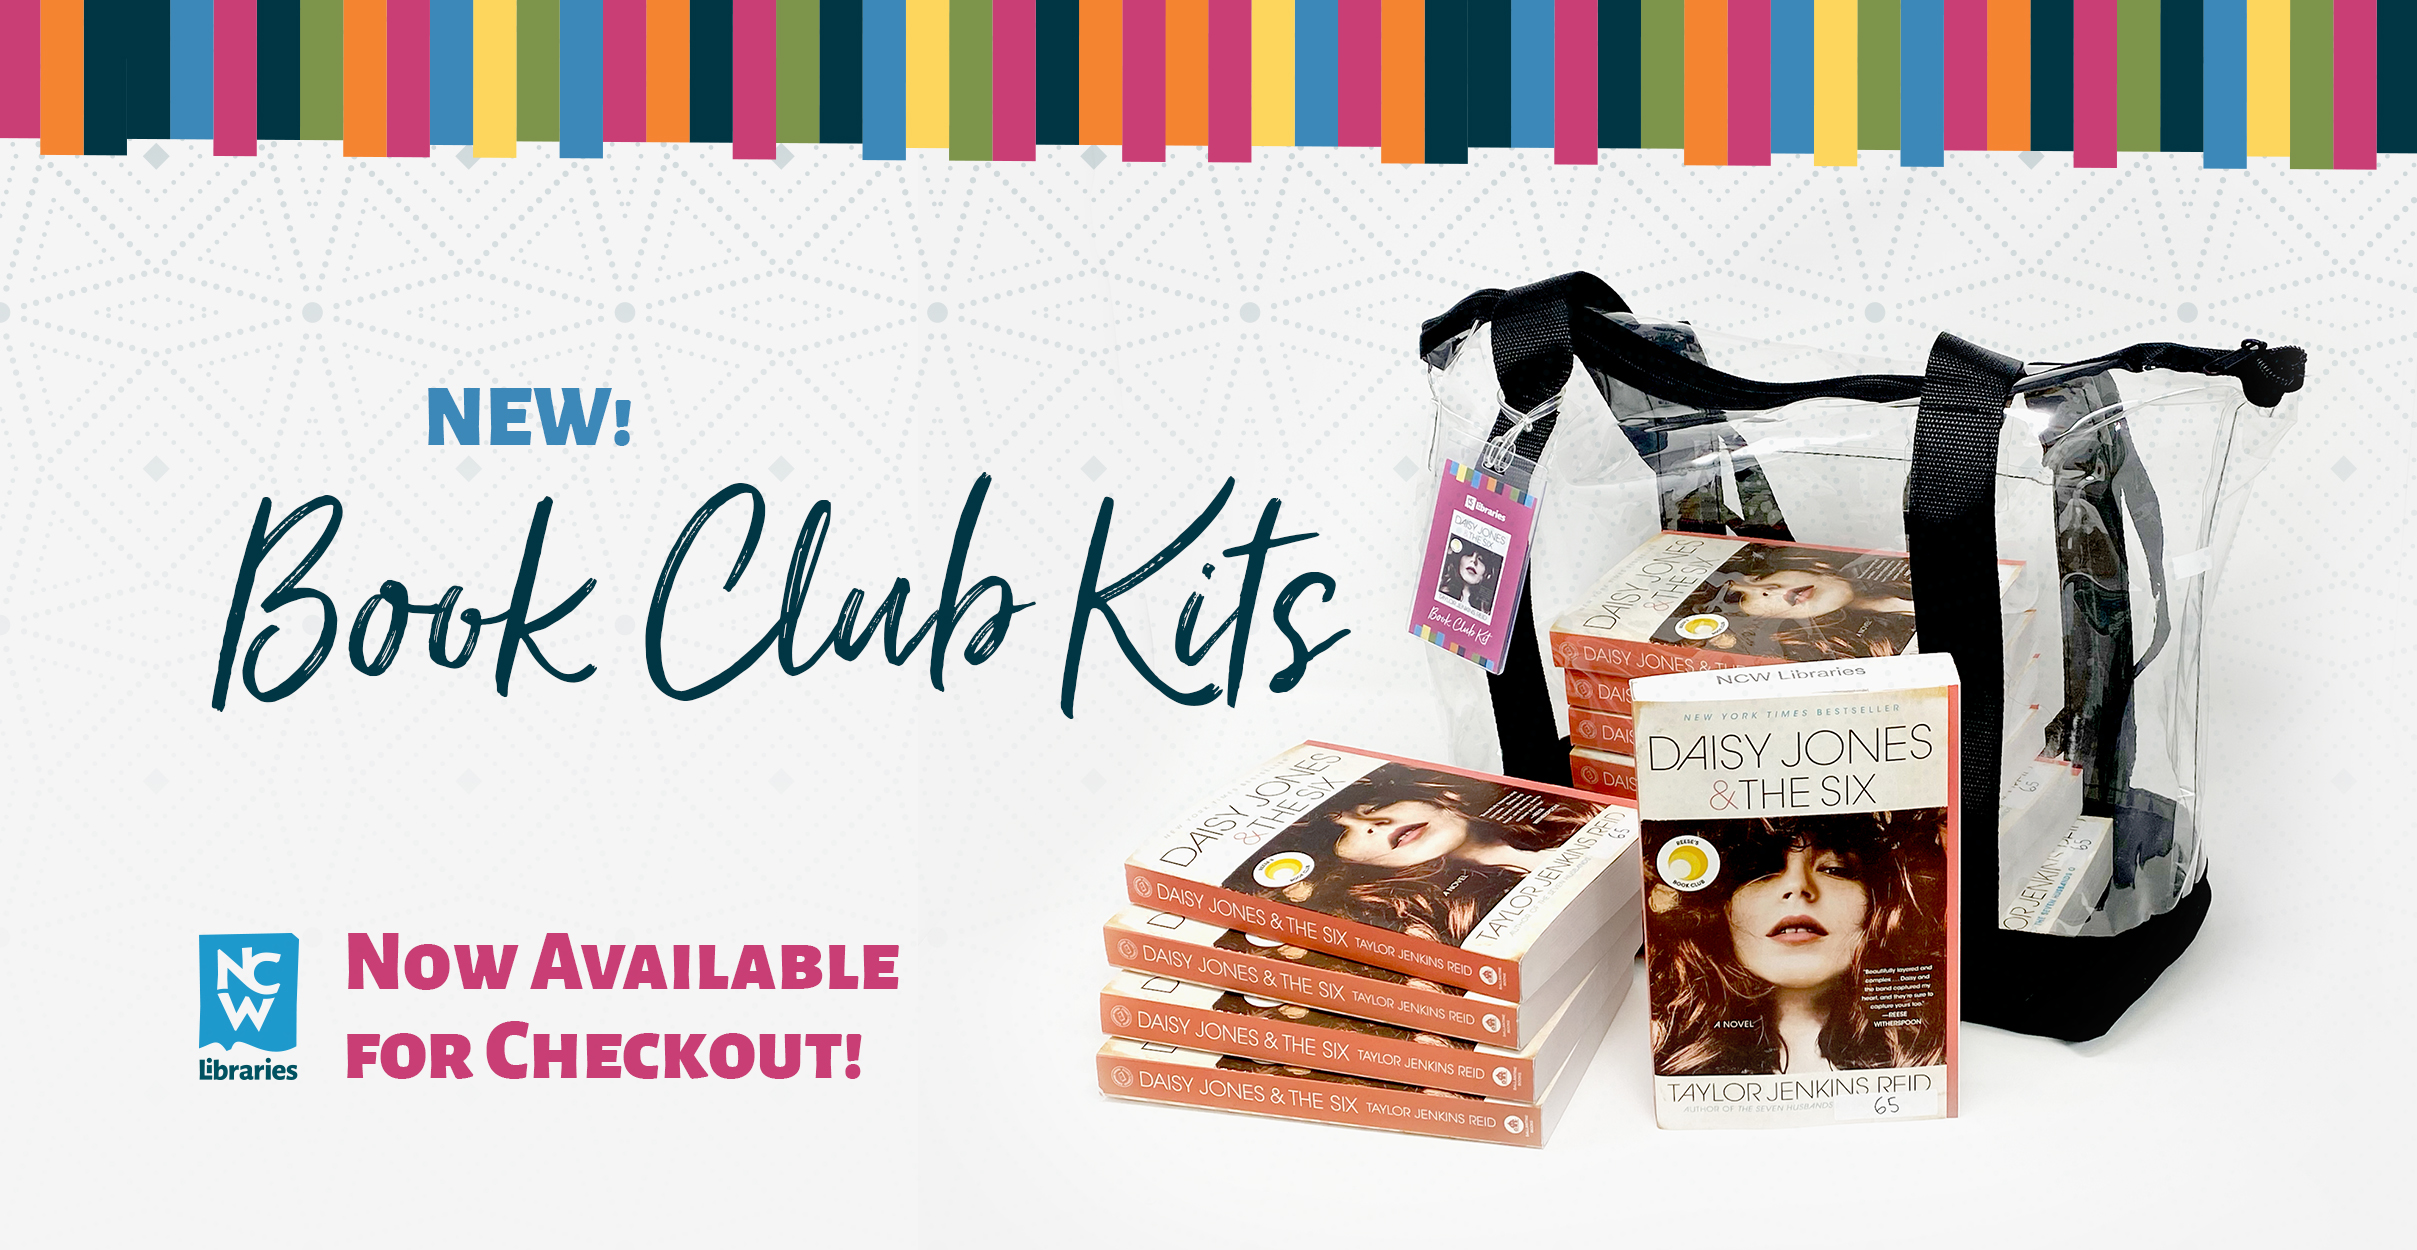 New Book Kits For Reading Clubs and Classrooms » NCW Libraries